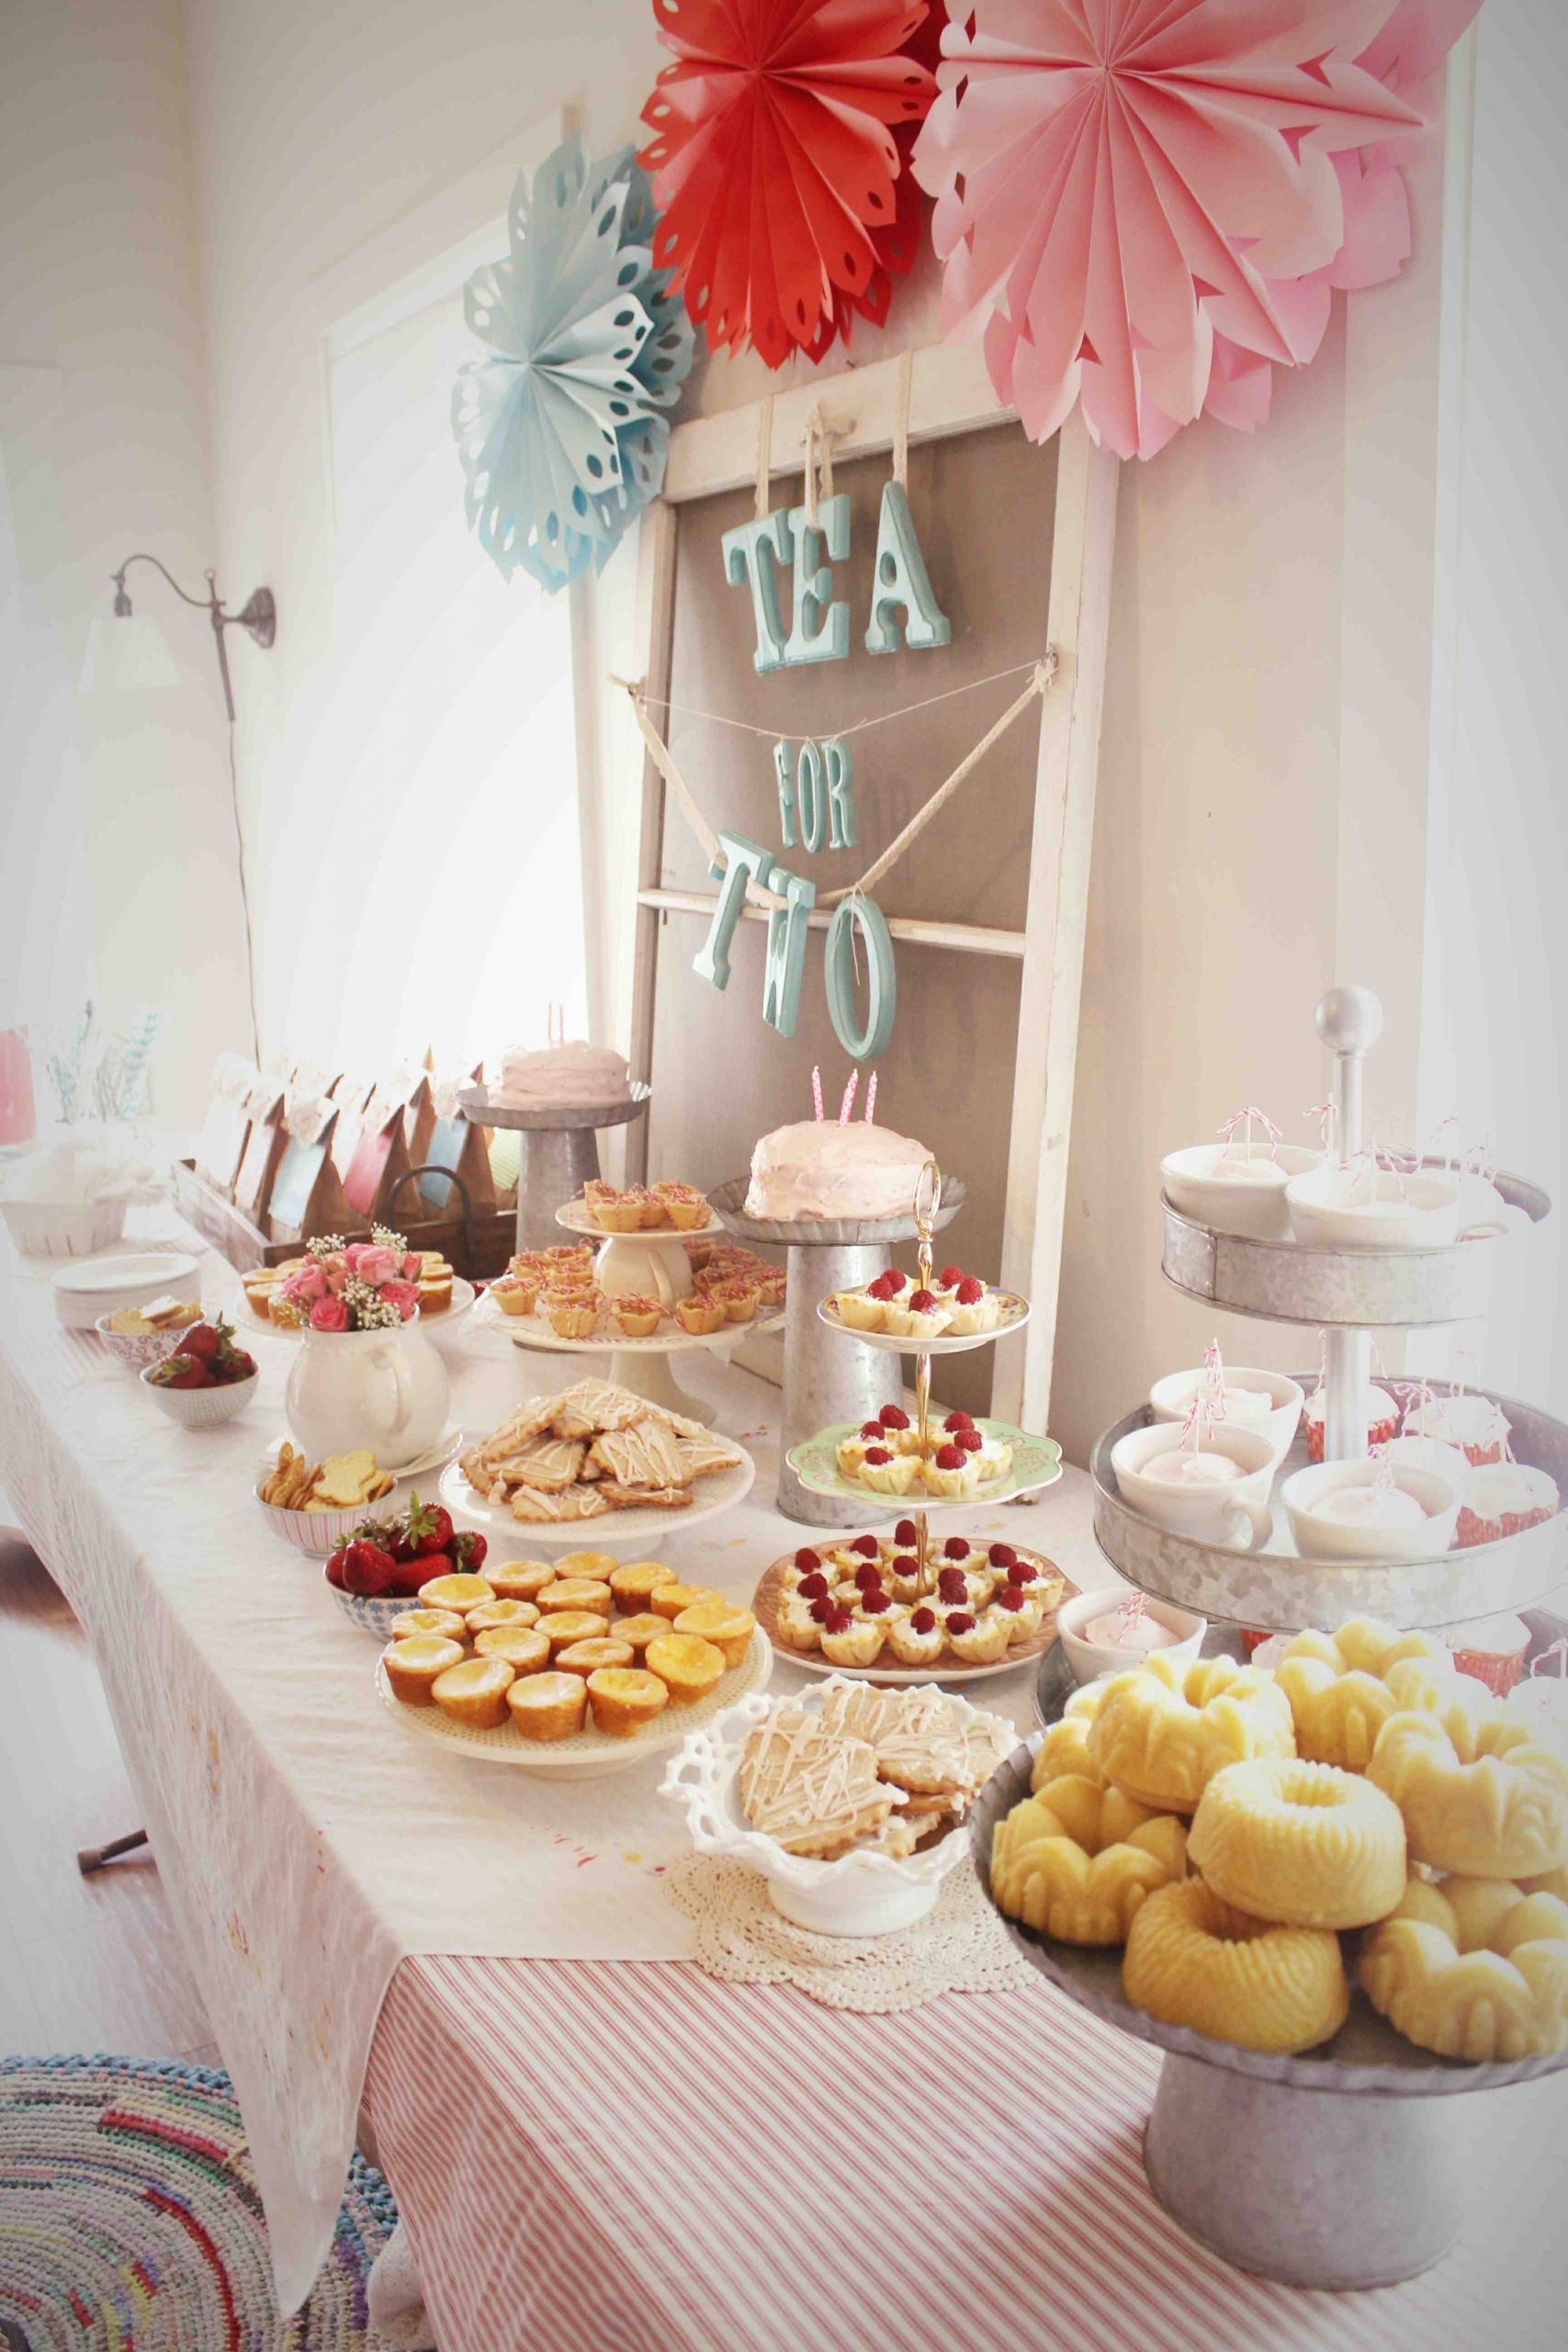 Tea Party Decorations Ideas
 A “Tea For Two” Birthday Party